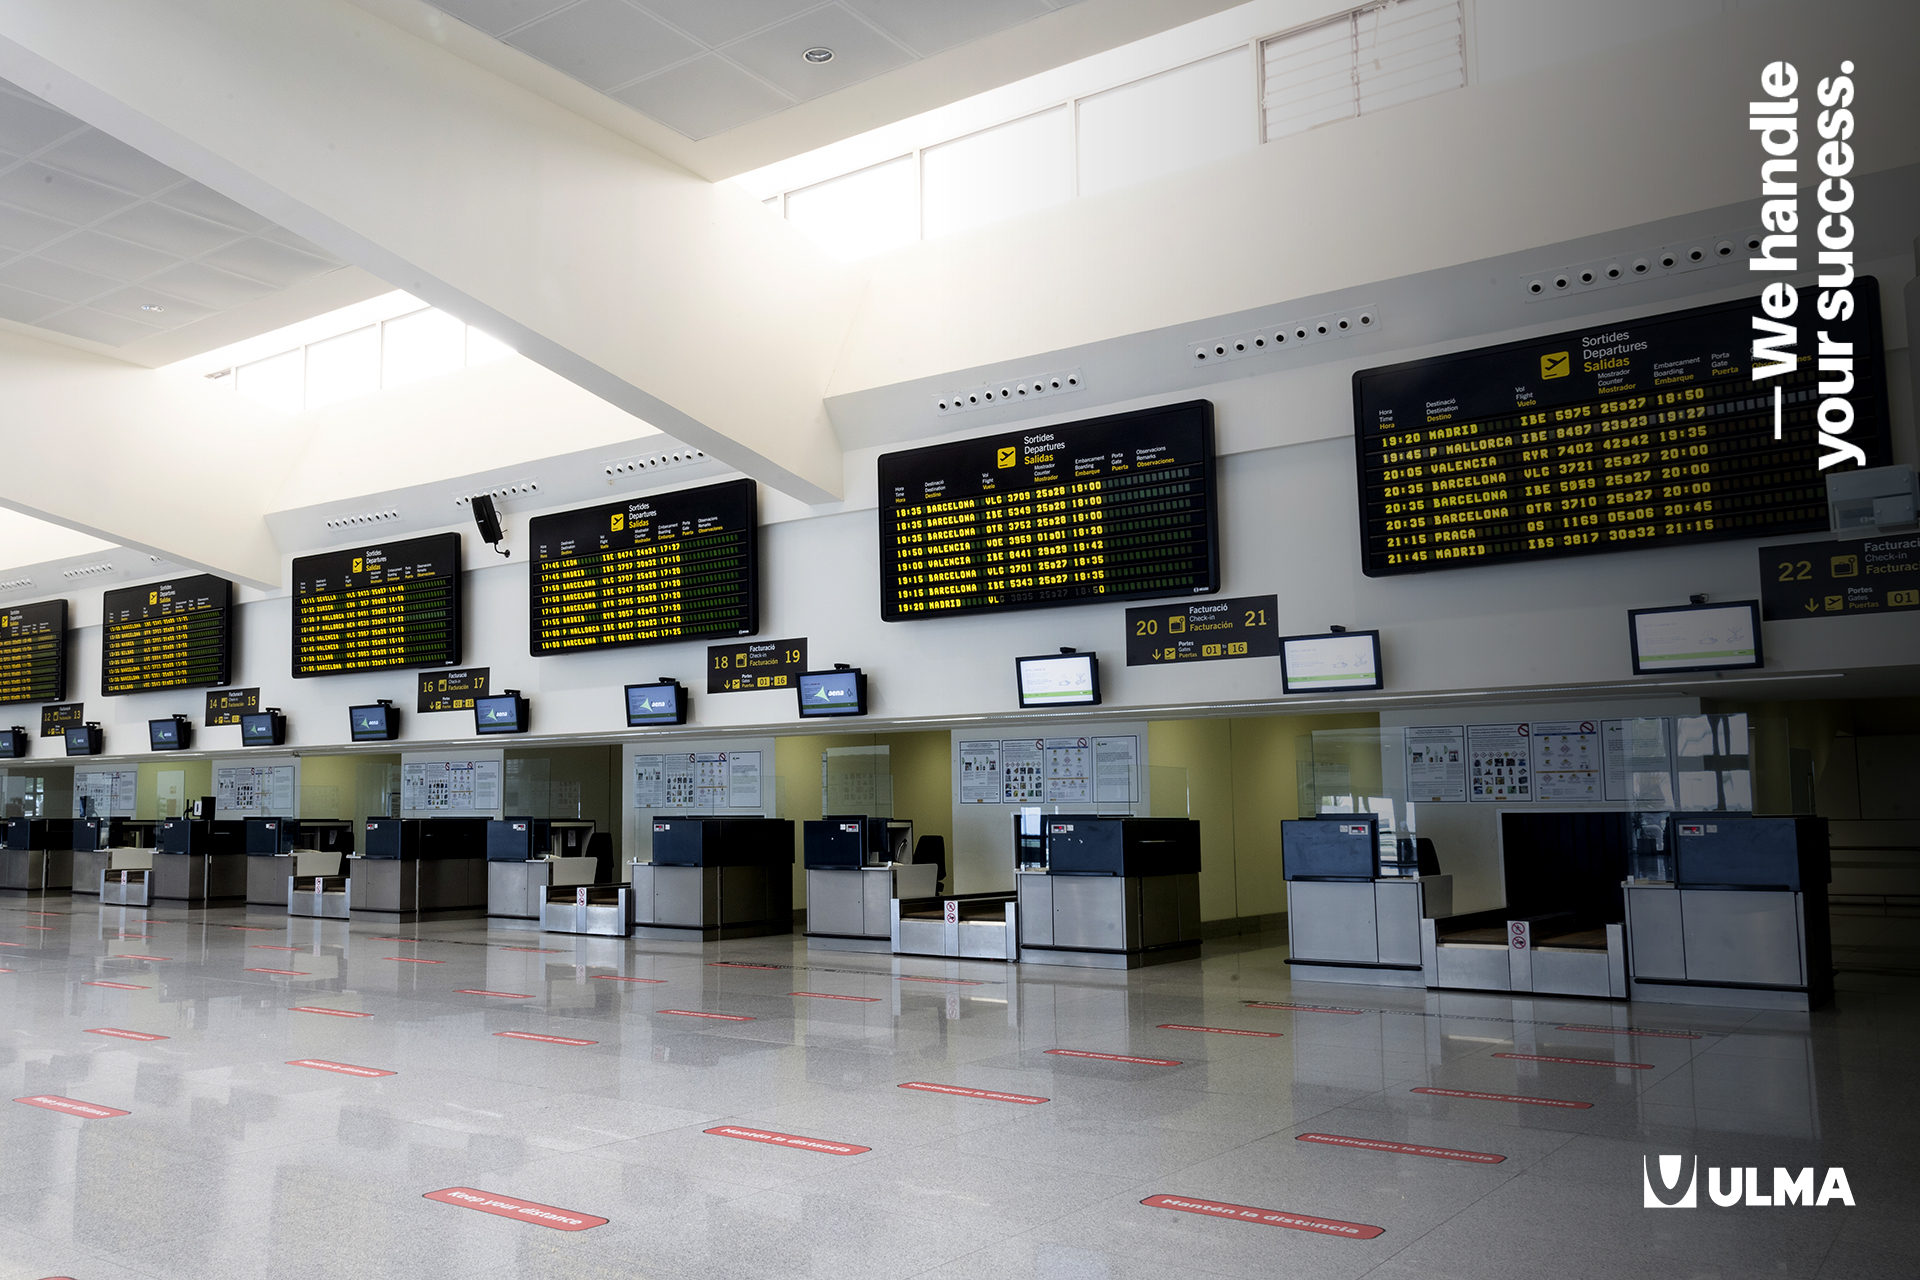  SECURITY IN AIRPORTS: your baggage during inspection 